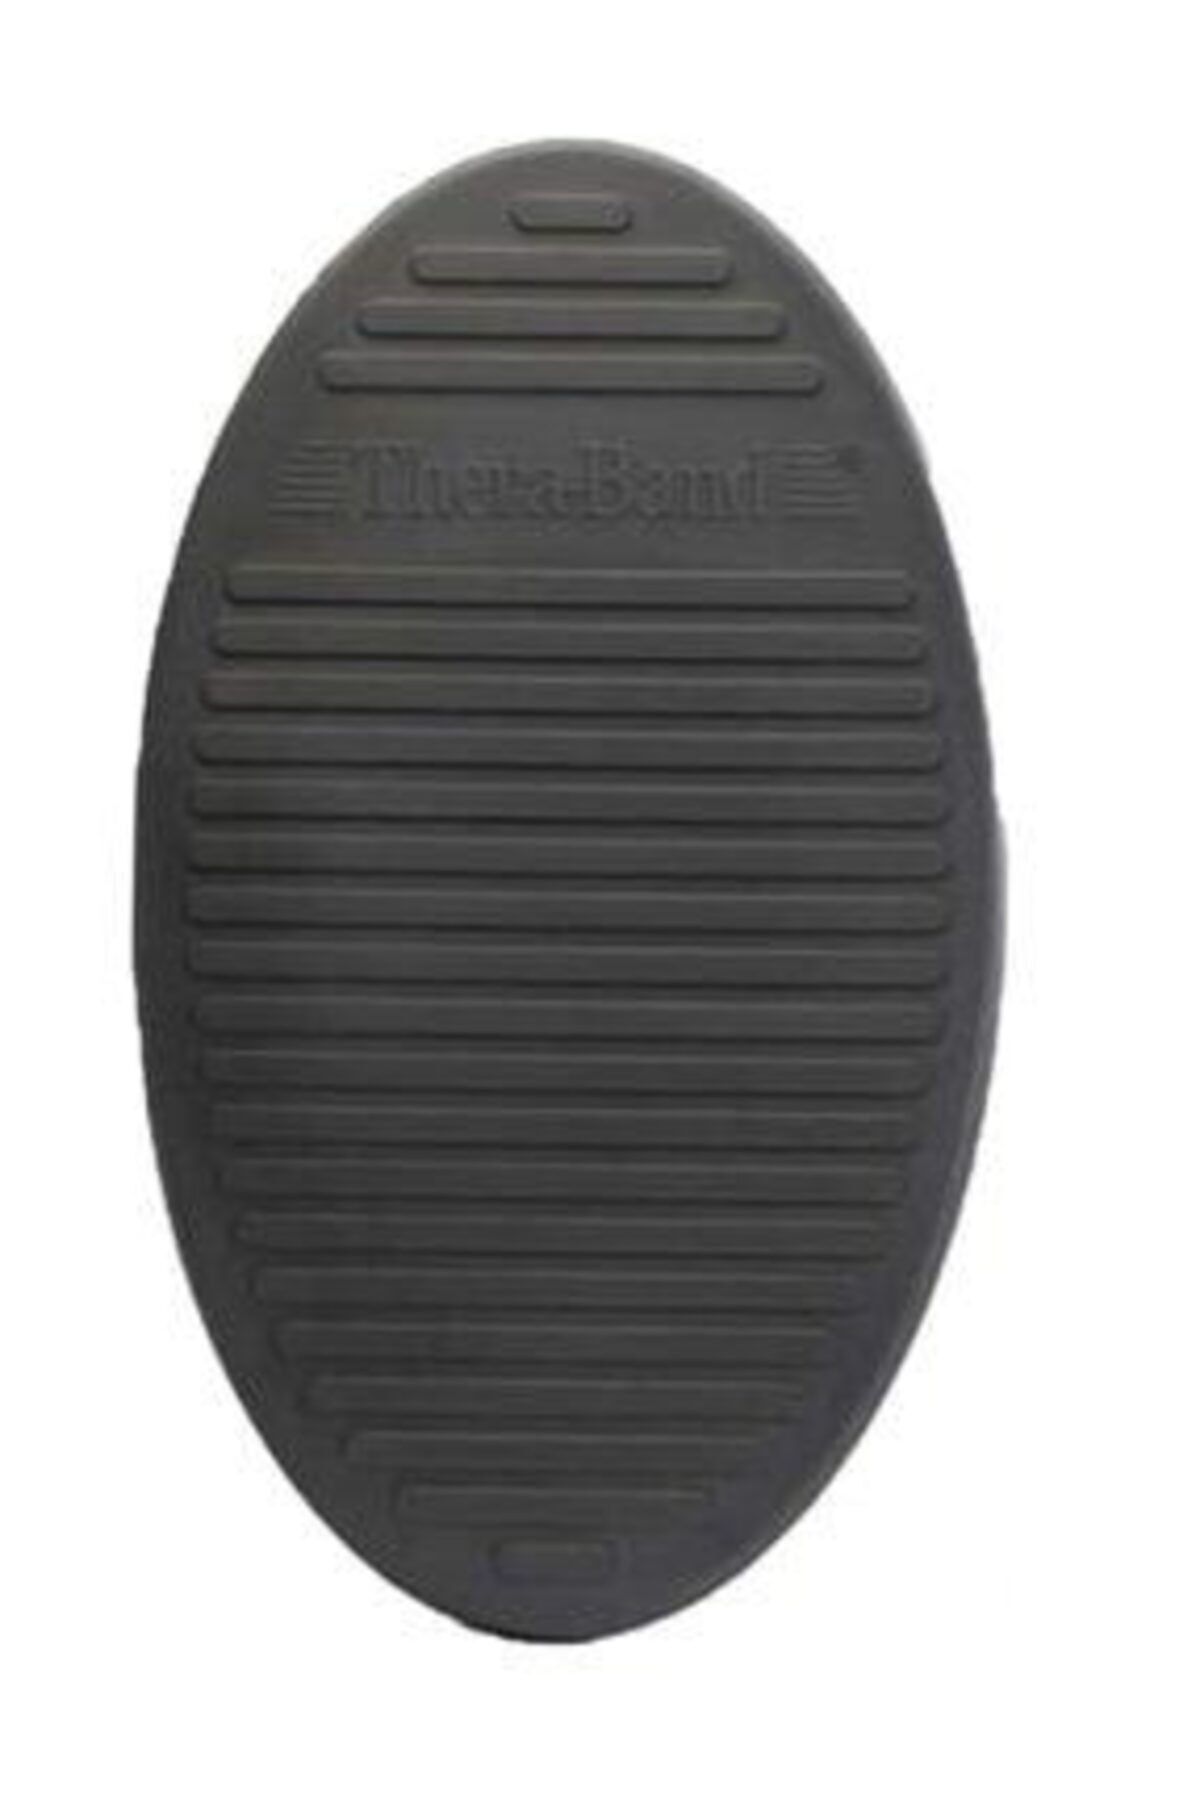 Theraband Thera-band Stability Trainer Black